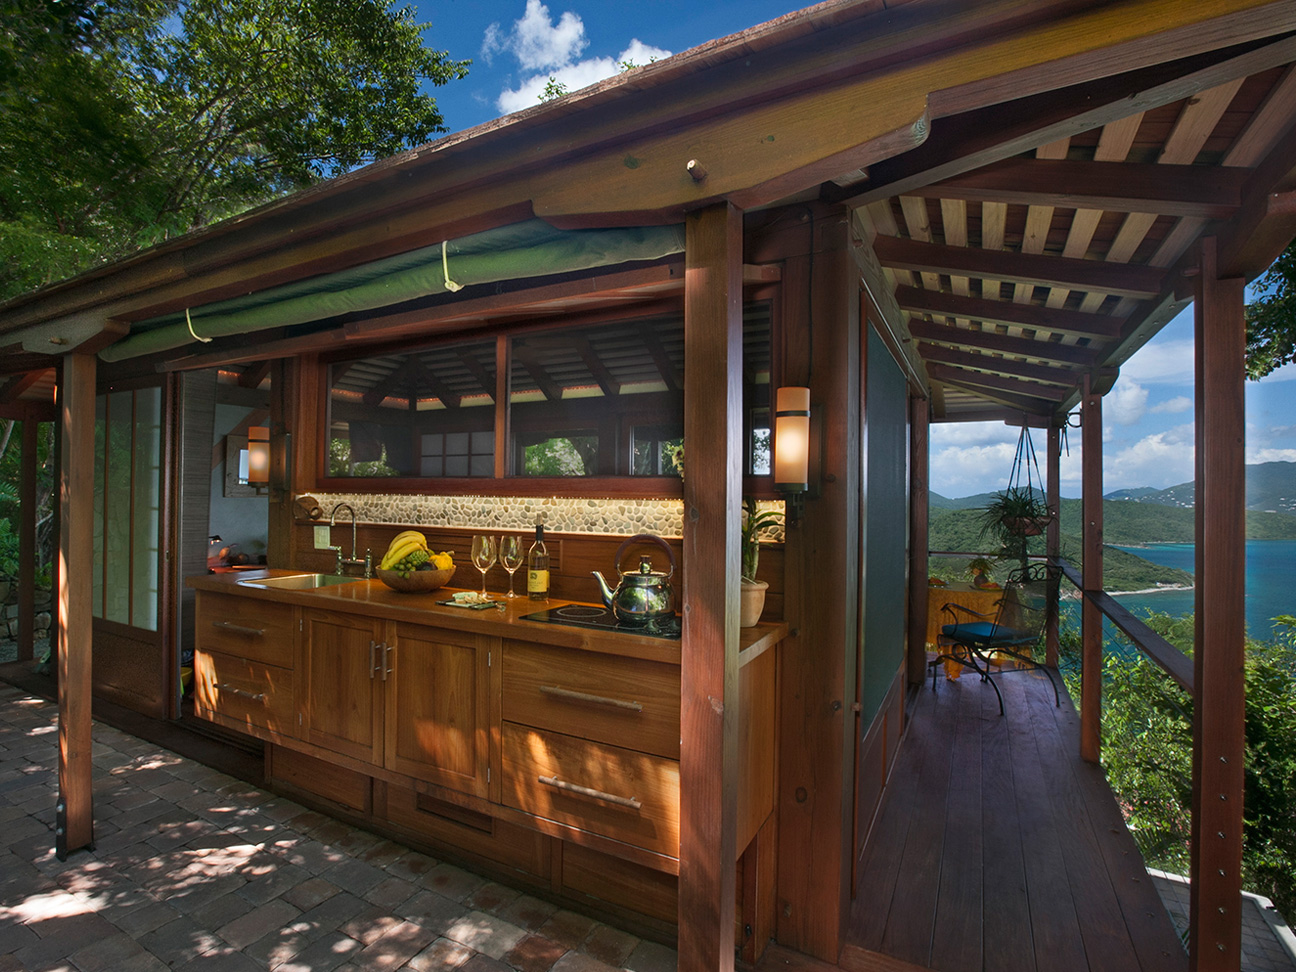 Galley Kitchen At Mooncottages Teahouse Treehouse